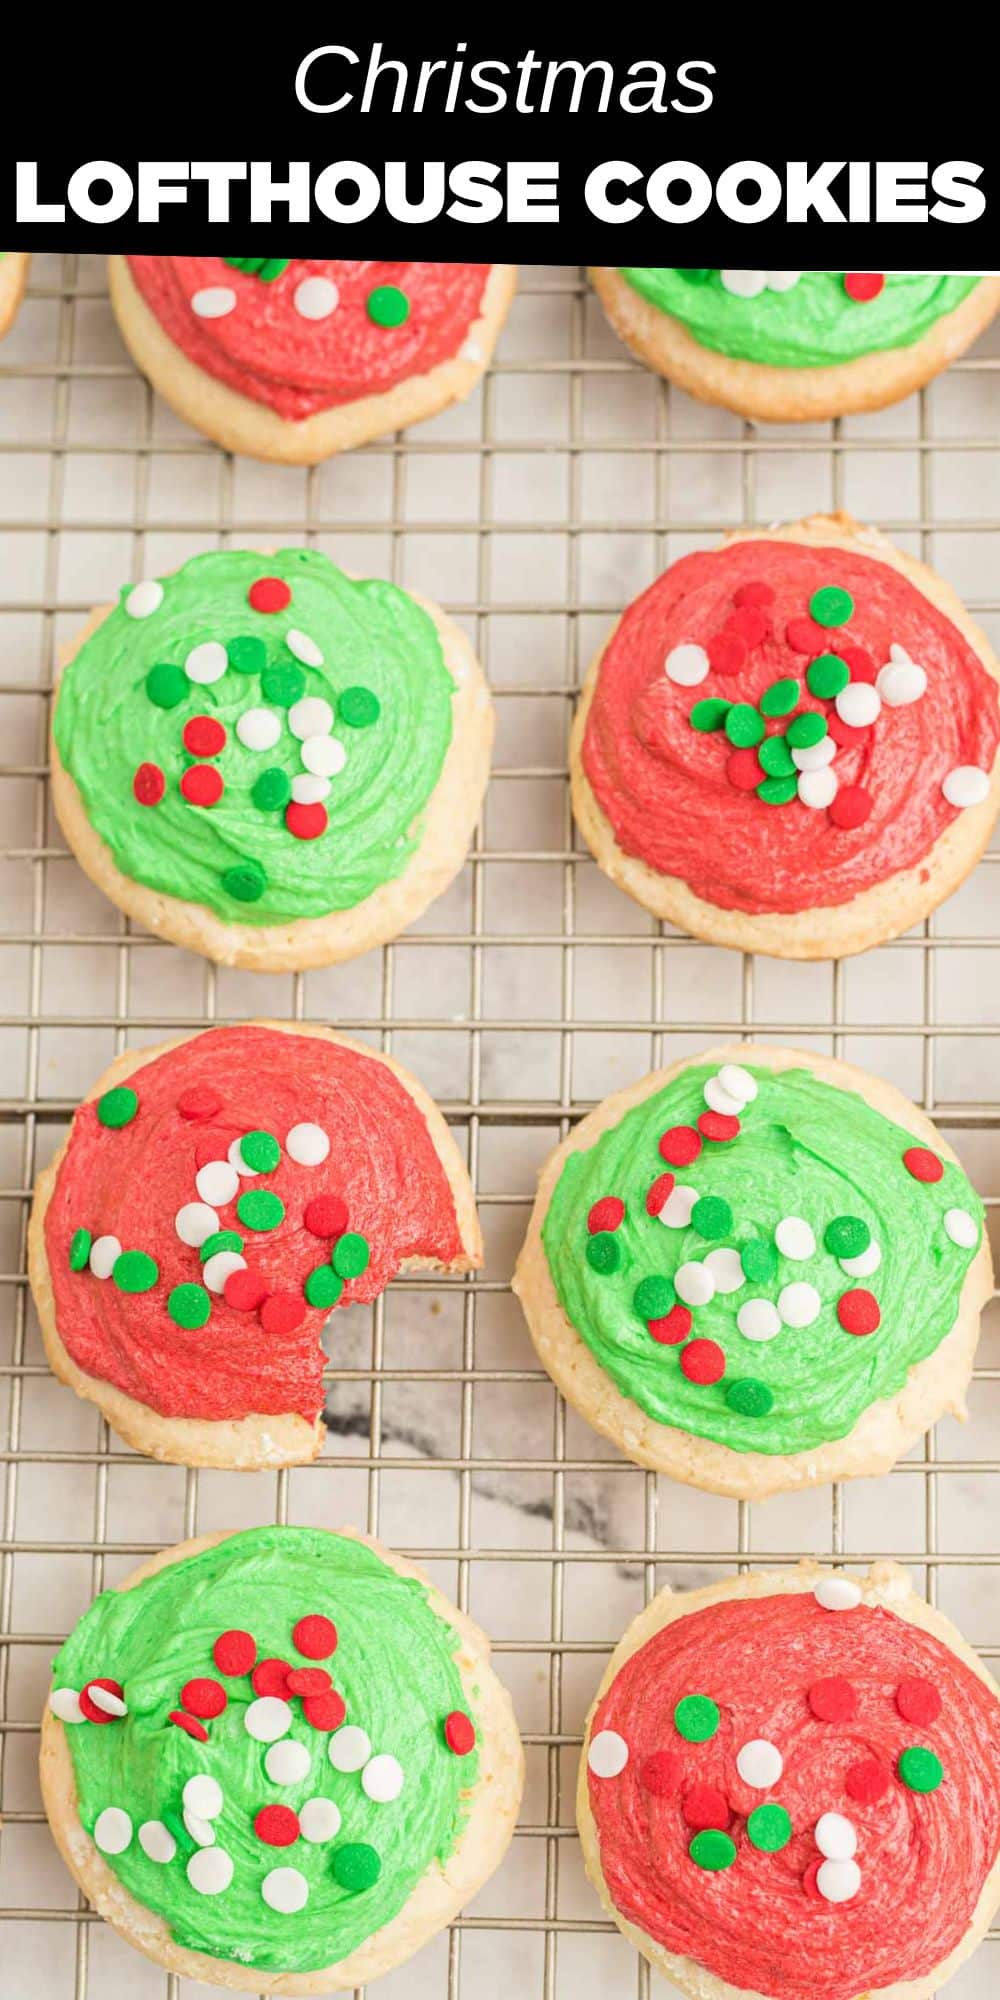 Lofthouse Christmas Cookies

This holiday season make Lofthouse Christmas Cookies in your own kitchen that taste even better than ones from the grocery store. These magically fluffy, cloud-like cookies are so easy to make and are topped with a sweet buttercream frosting and festive holiday sprinkles the kids will go crazy over.